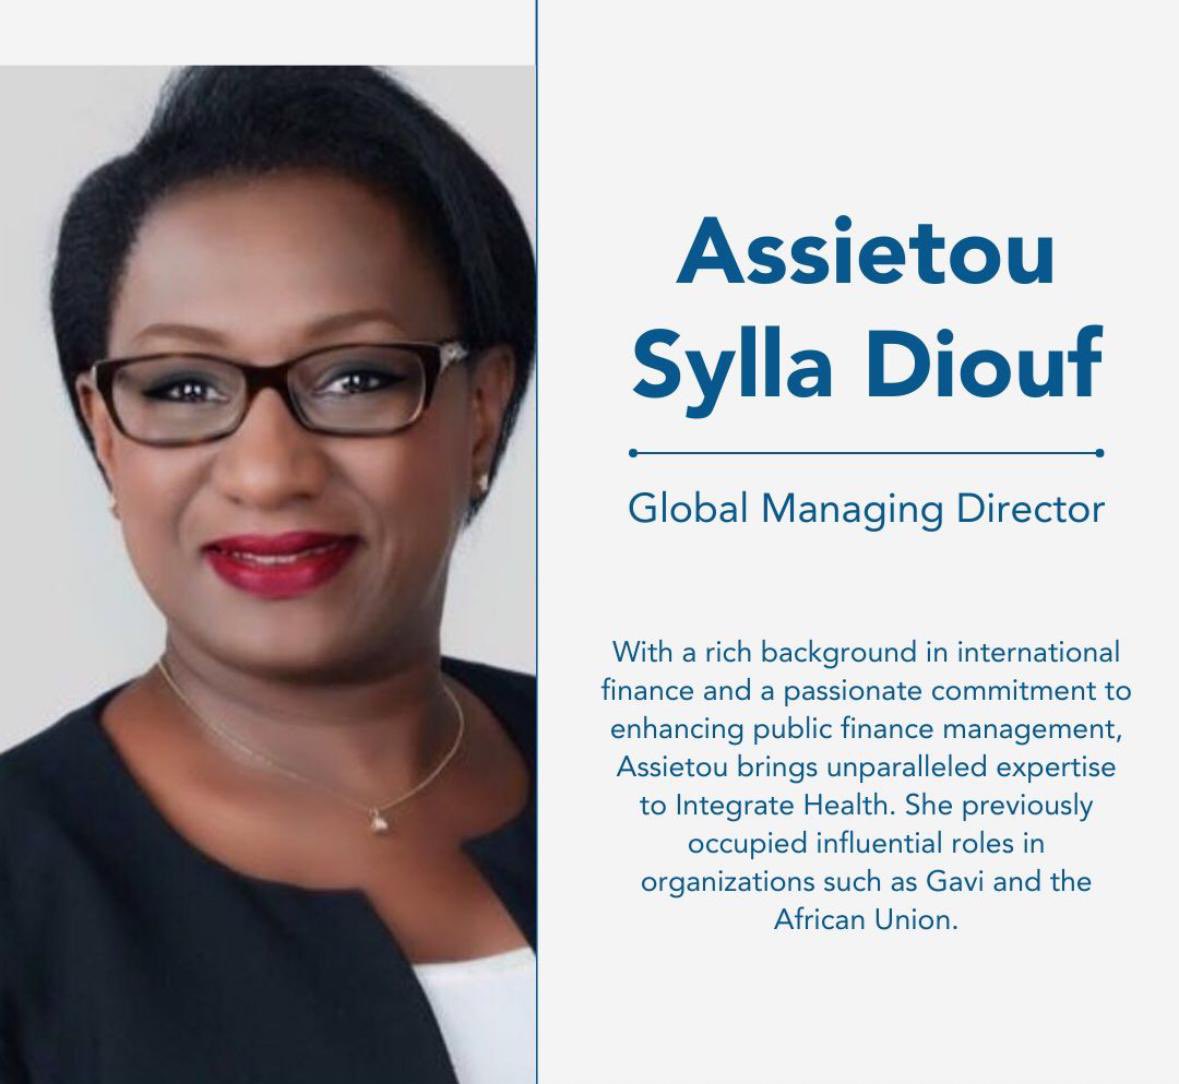 Congratulations, Assietou Sylla Diouf @assietou_sylla on your appointment. Your extensive experience in financial management and commitment to improving healthcare systems in Africa will be impactful across Africa.